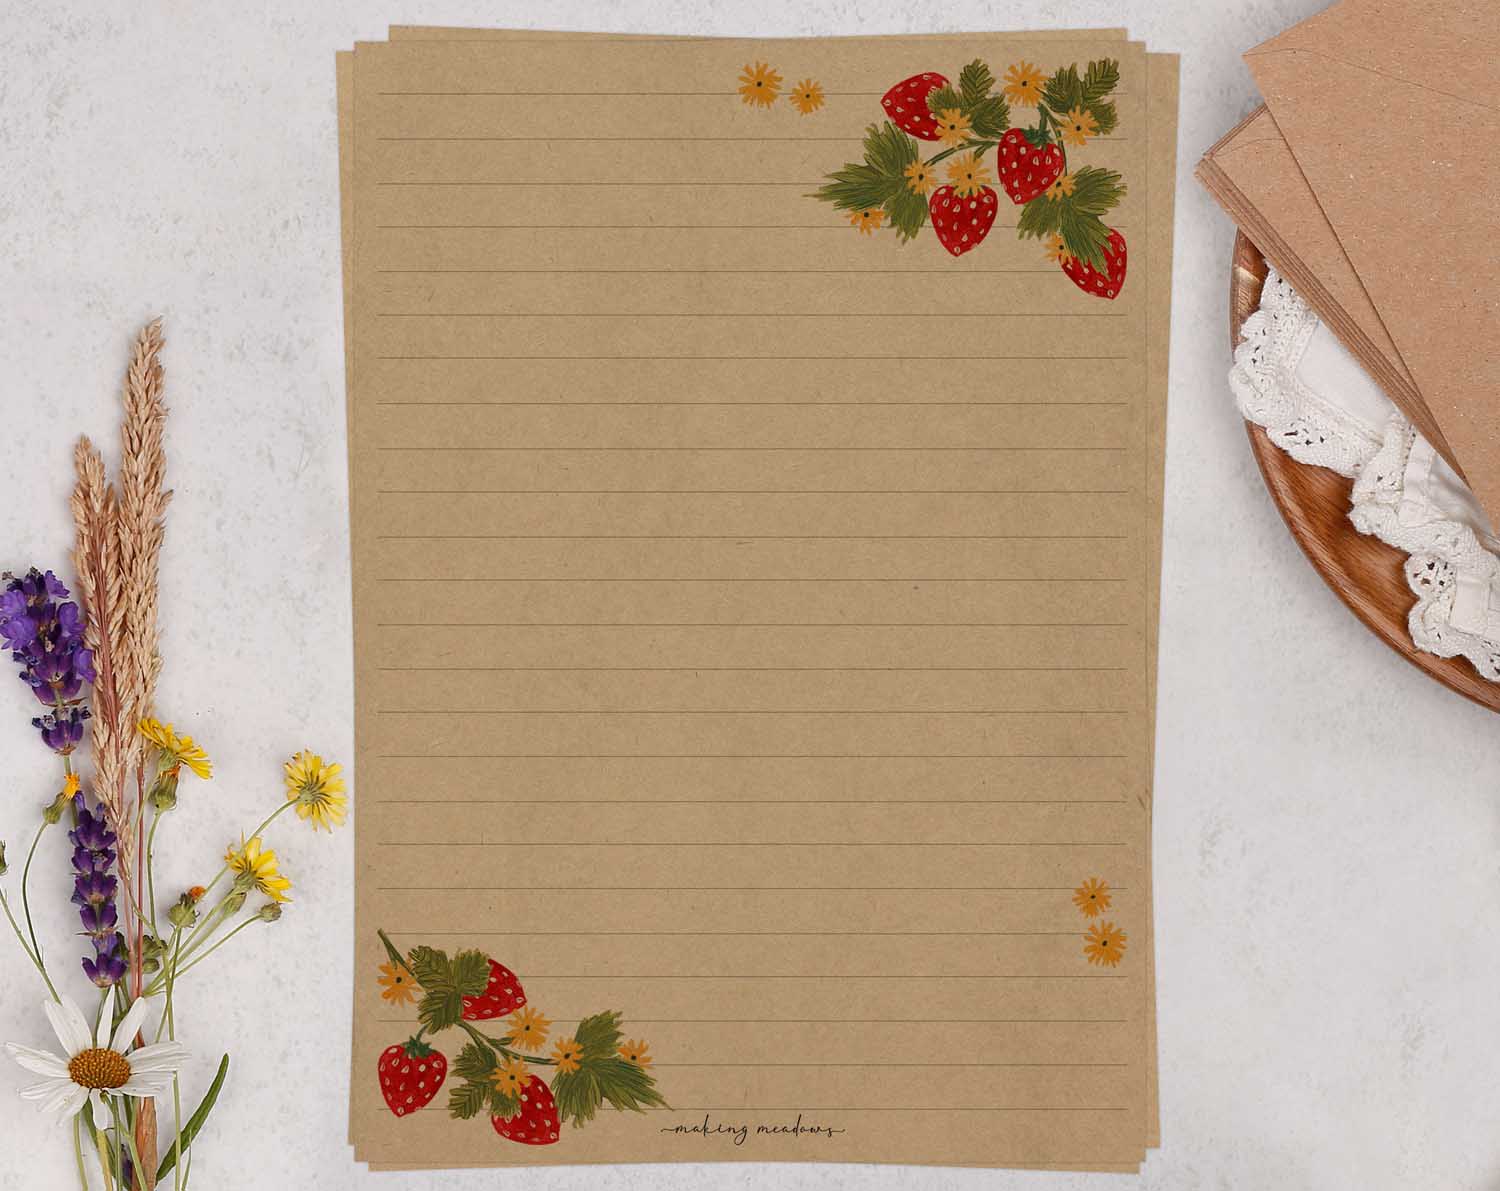 A5 Kraft letter writing paper sheets with a cute strawberry blossom design.